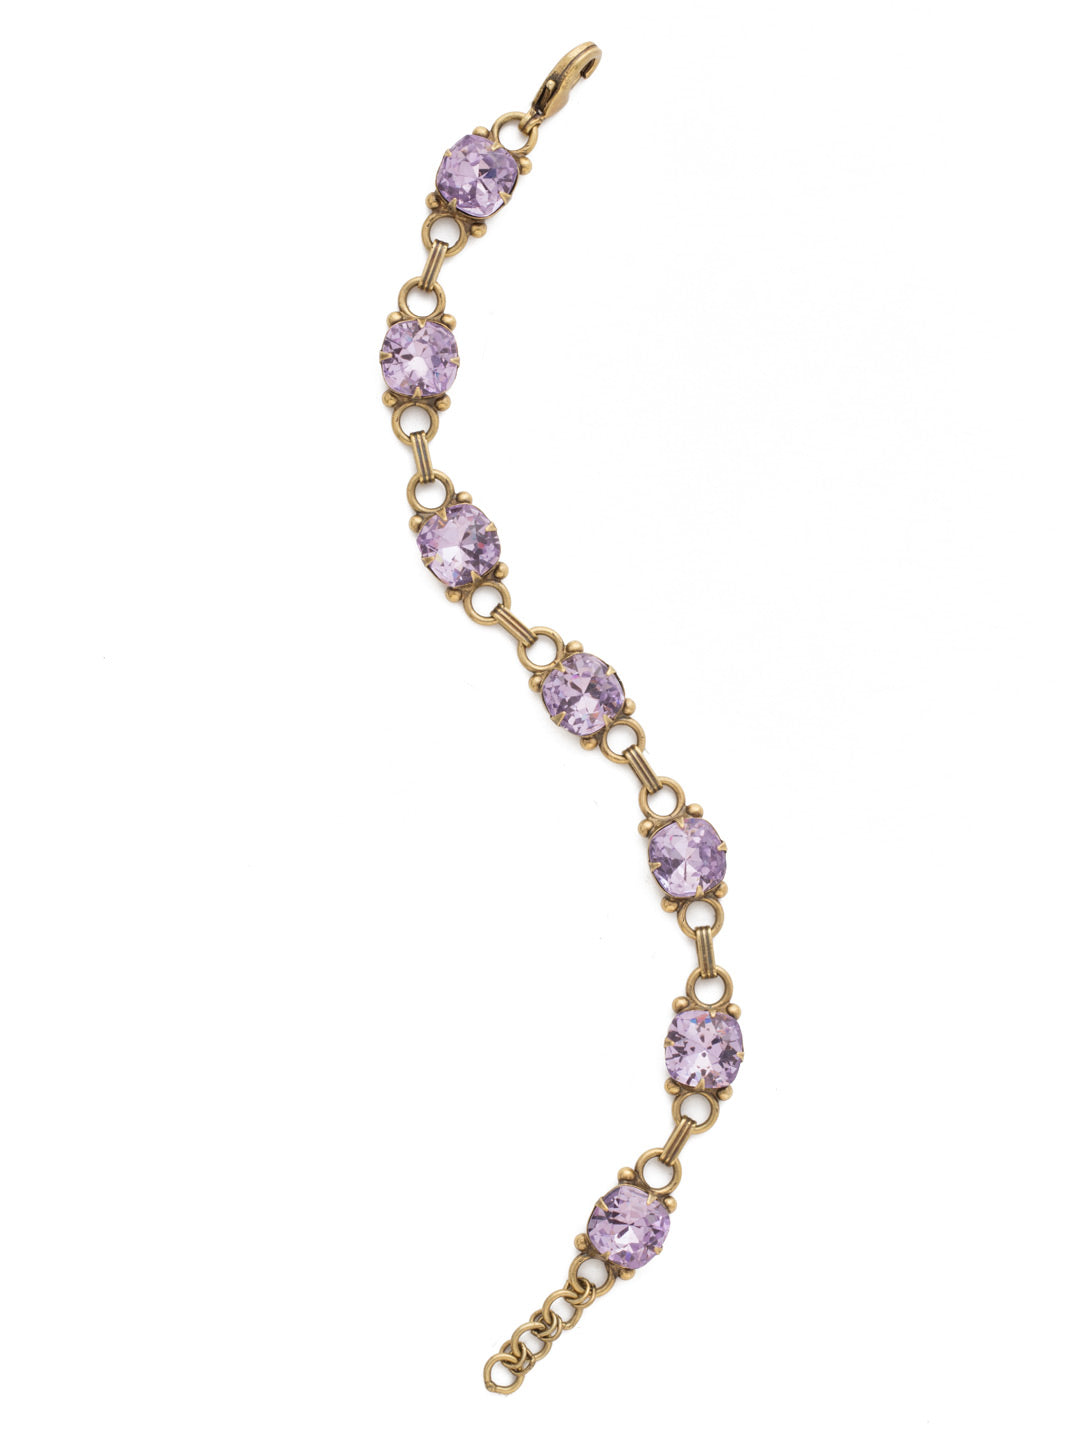 Eyelet Line Tennis Bracelet - BDN16AGVI - <p>A classic design that can be added to any look for just enough sparkle. From Sorrelli's Violet collection in our Antique Gold-tone finish.</p>